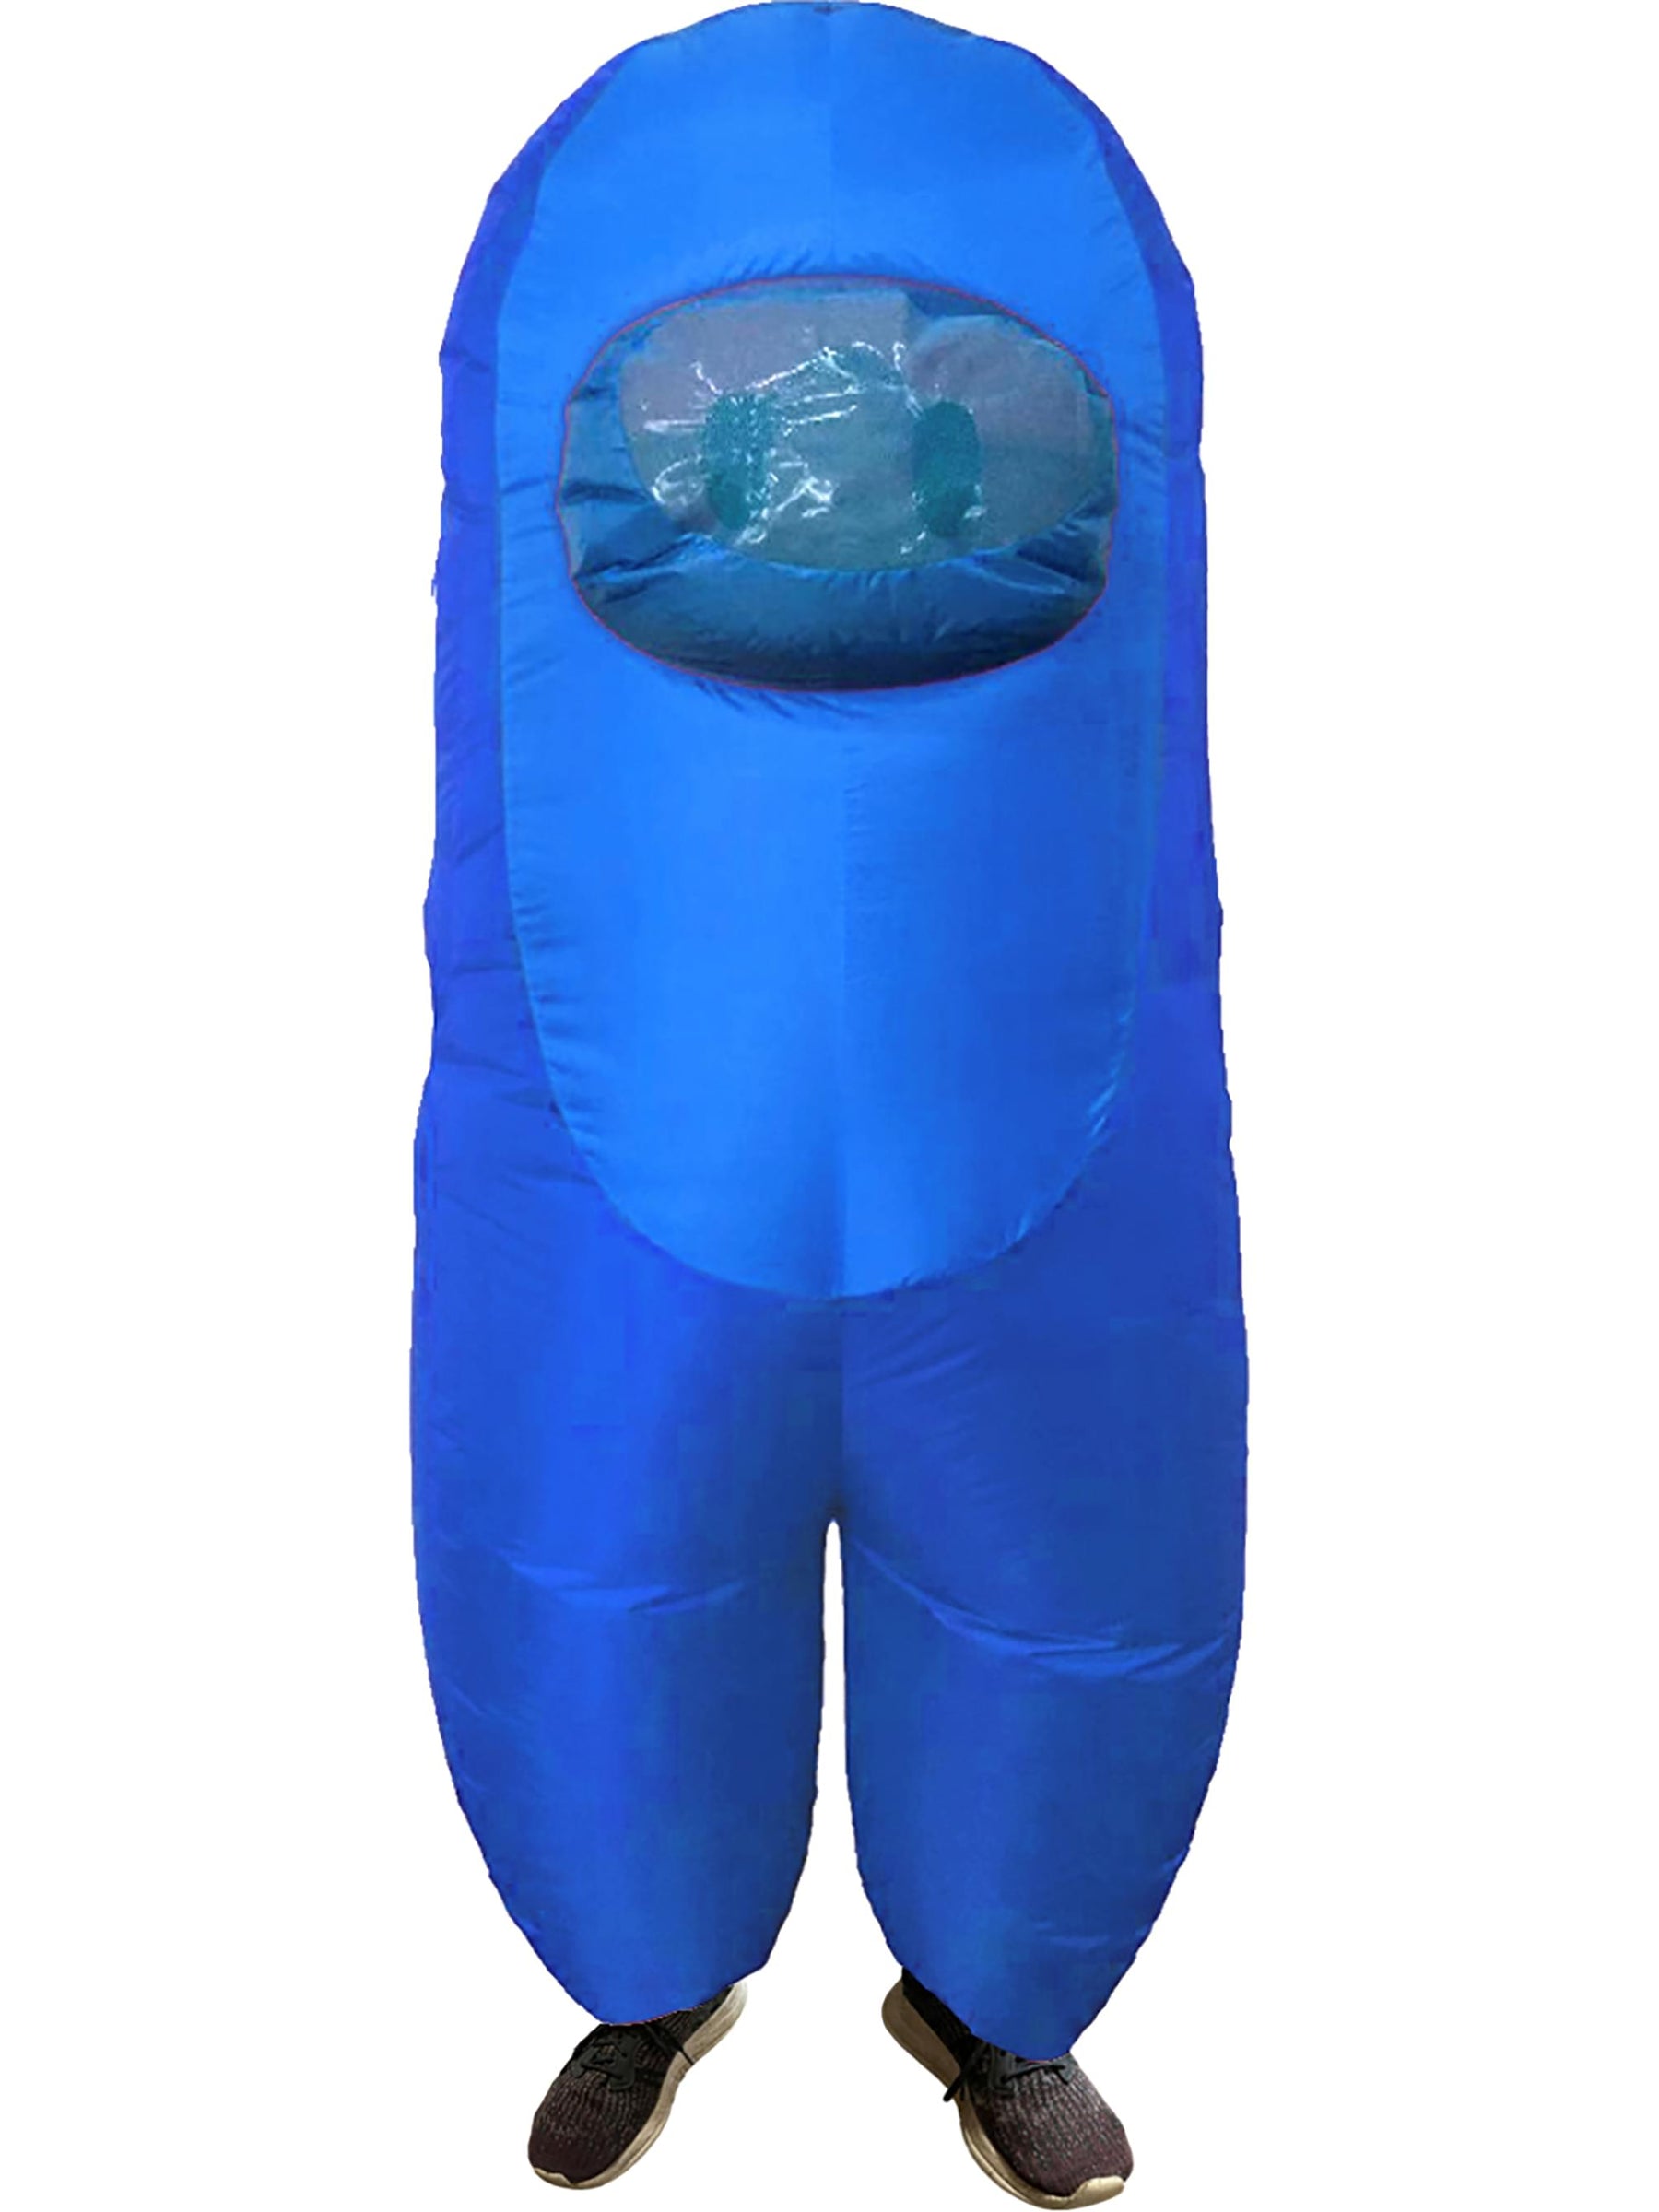 Blue Imposter Inflatable Adult Costume | Standard